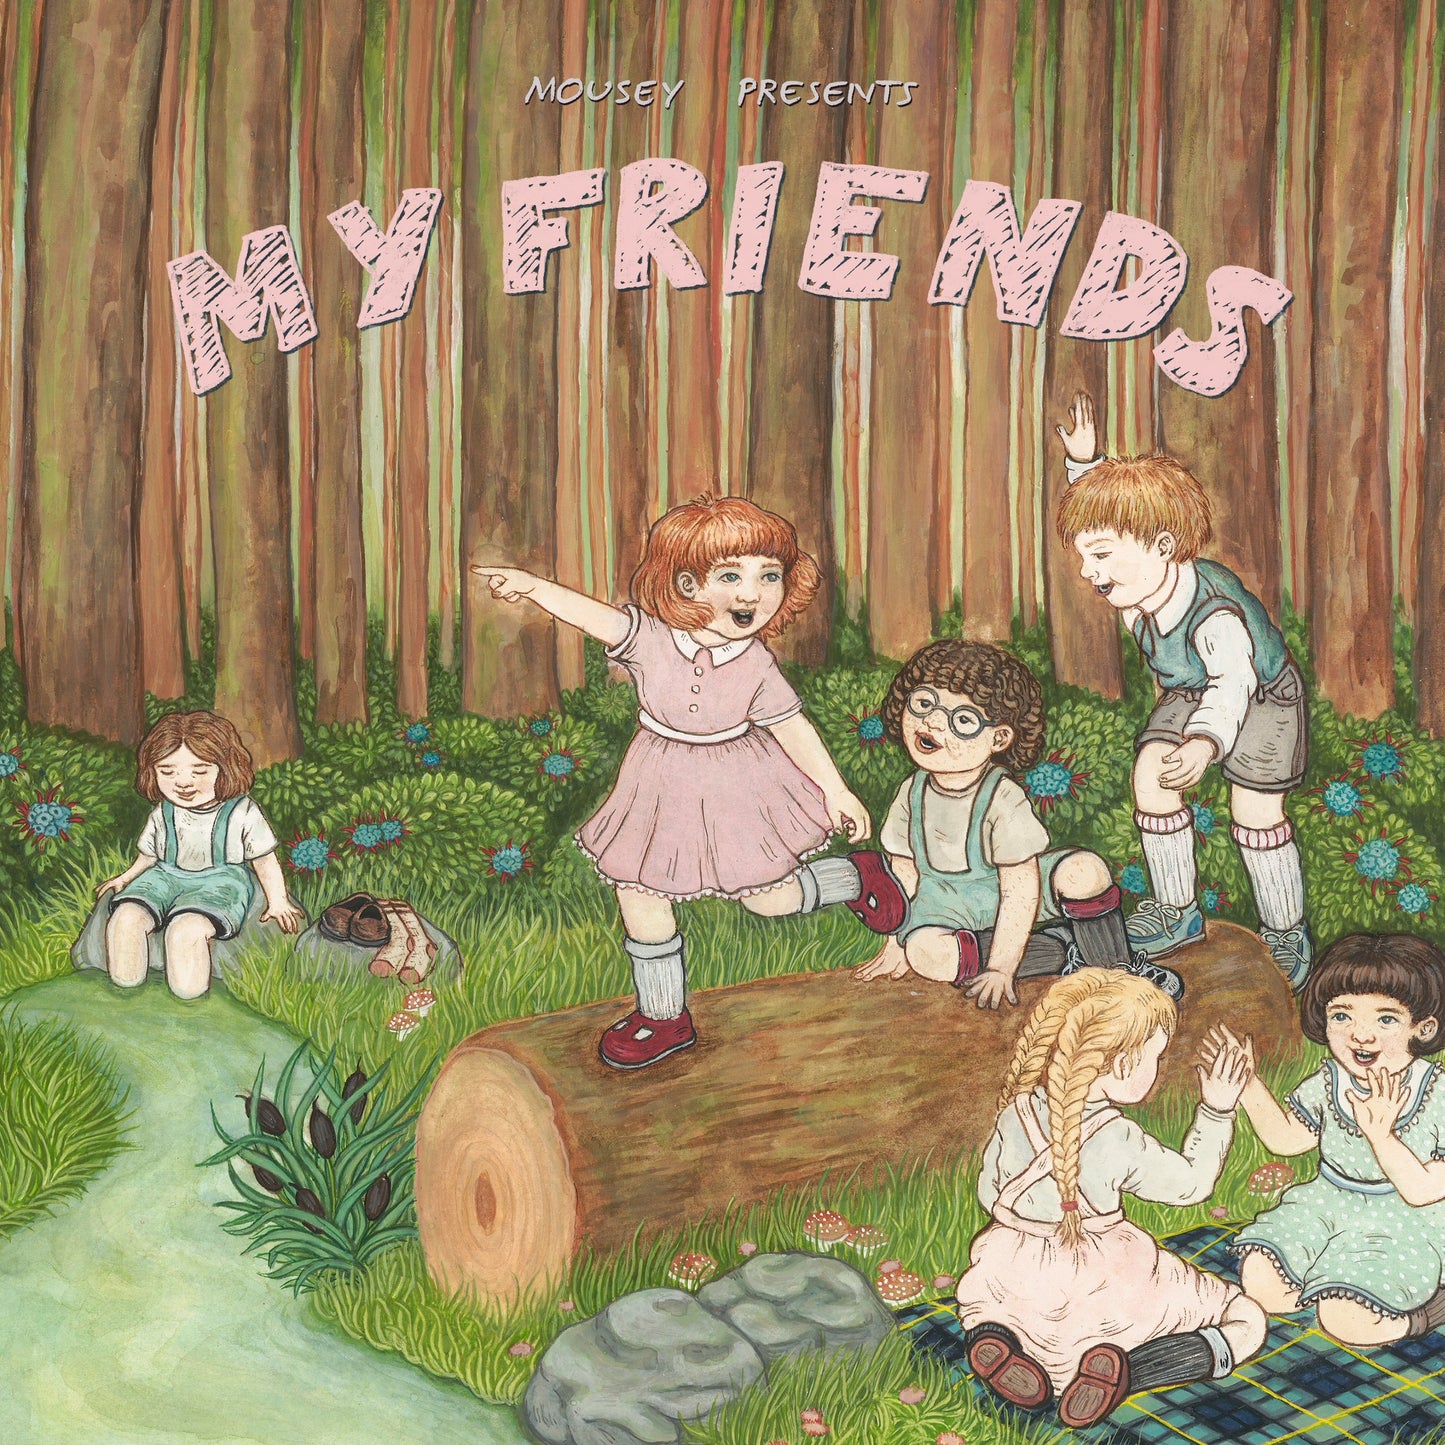 Mousey Artist From New Zealand - My Friends - out on Vinyl LP